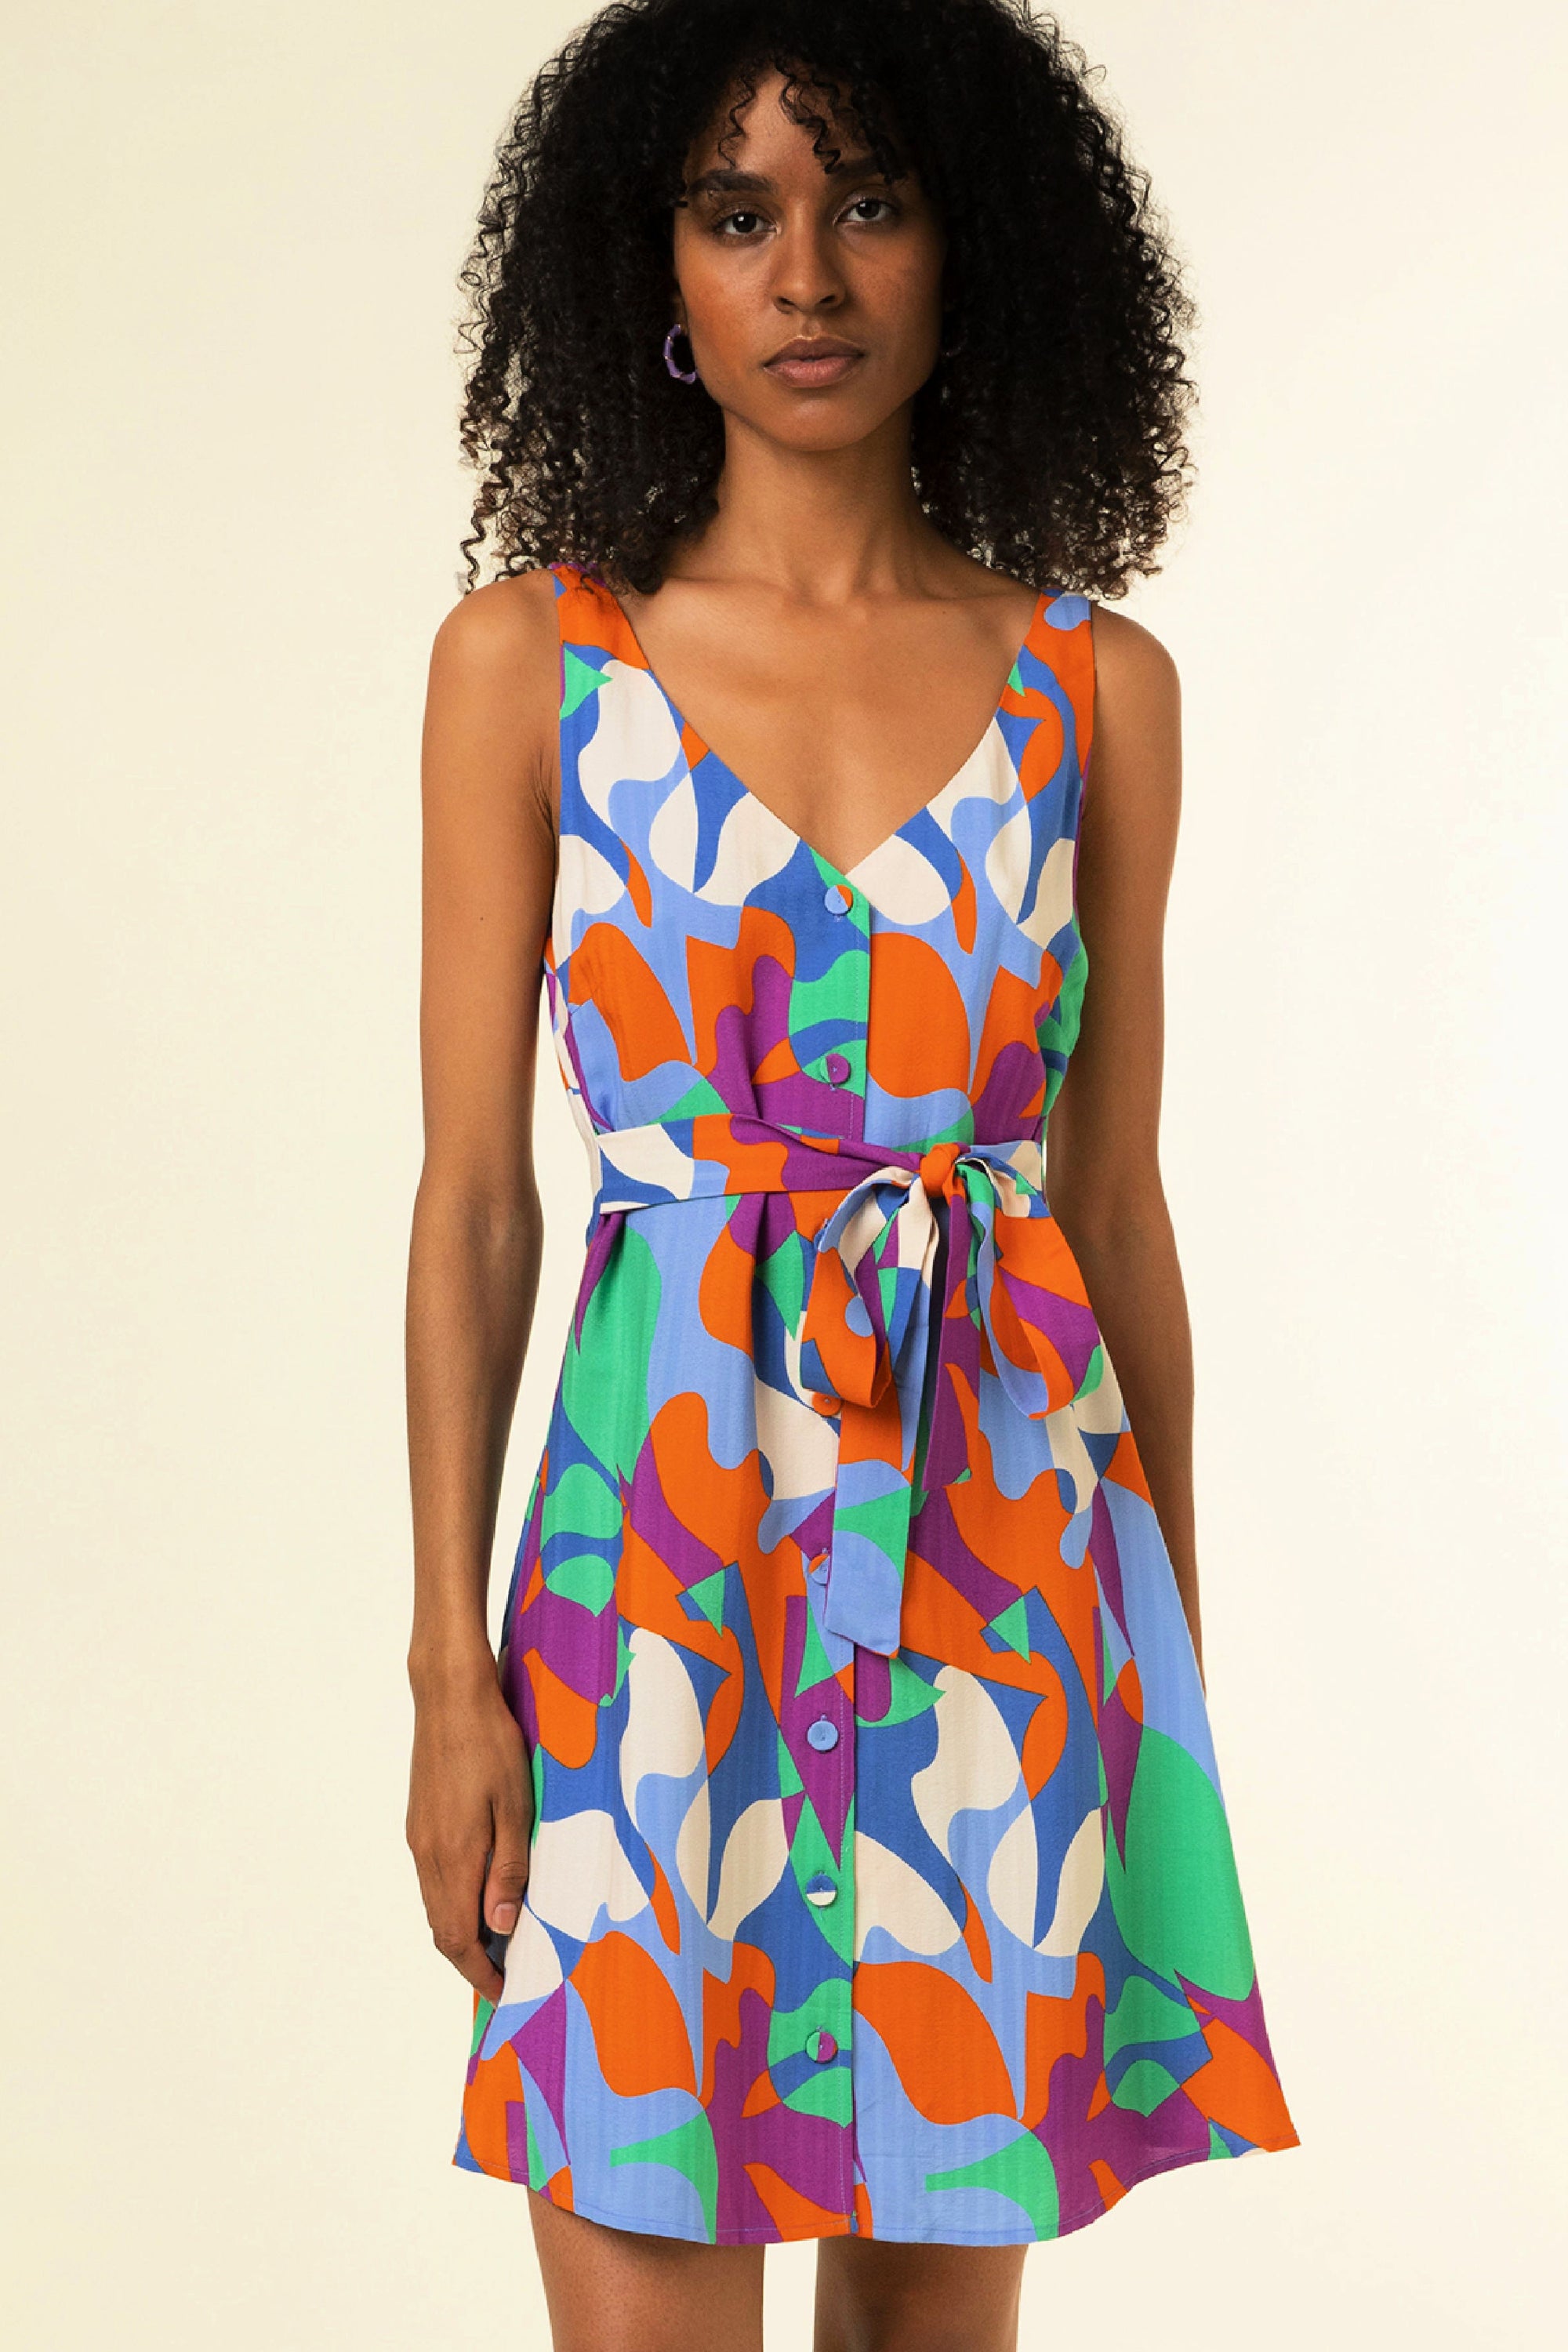 The Elora Abstract Mini Dress by FRNCH